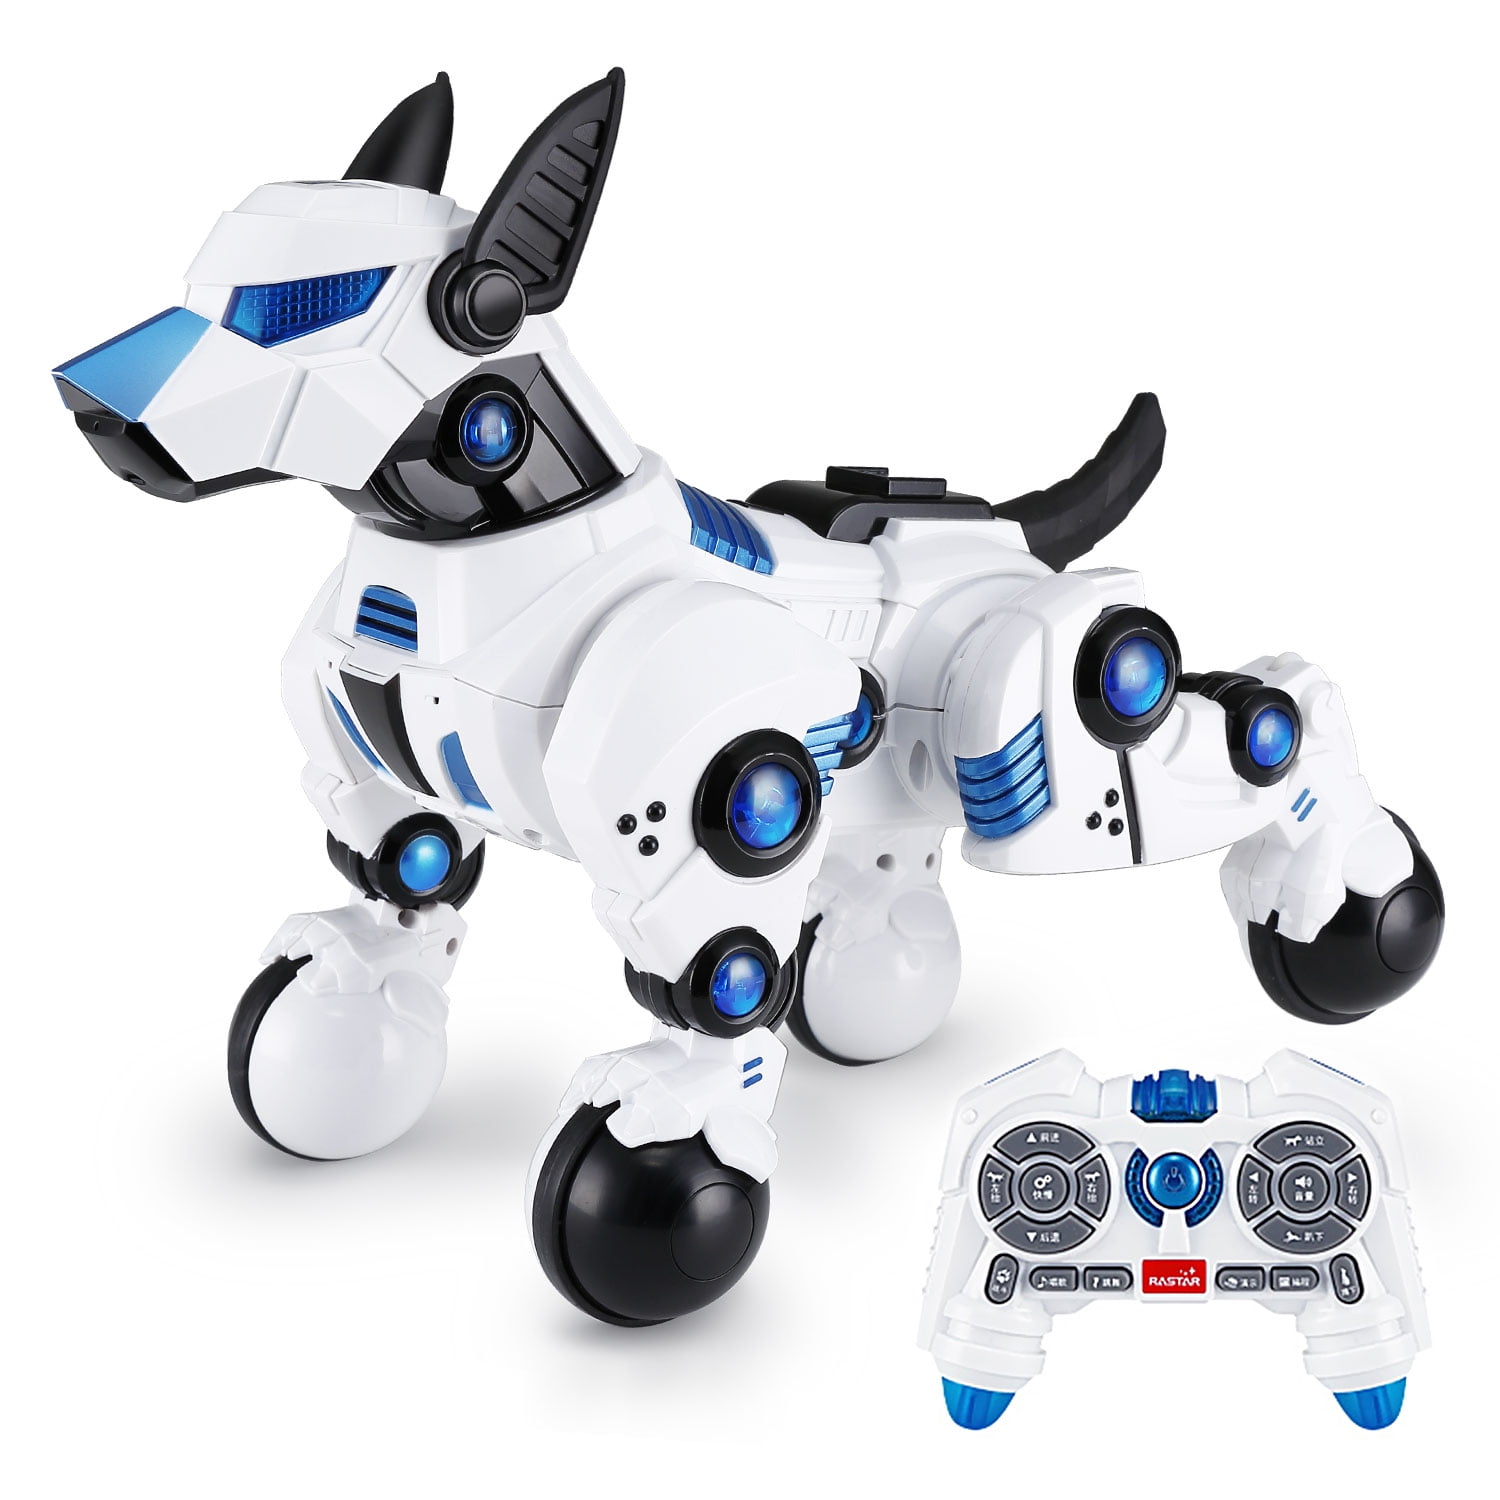 Intelligent Robot Dog with Remote control Kids, USB charger, Dancing Demo - White - Walmart.com